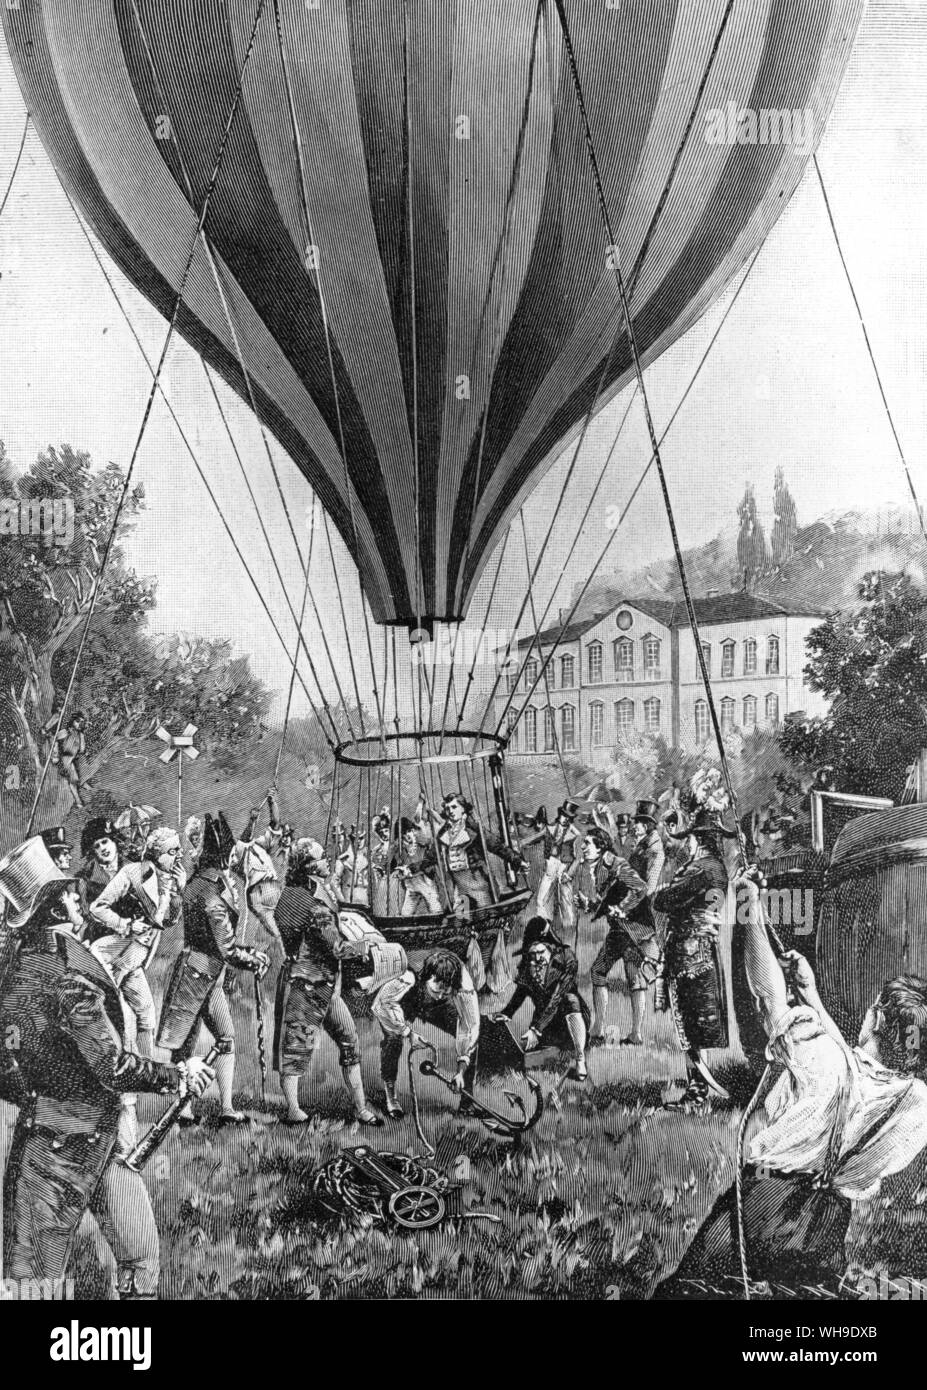 On 16th September 1804, Humboldt's friend Gay-Lussac made a remarkable solo balloon ascent from Paris in order to carry out scientific observations at high altitude. He reached a height of 23,000 feet, thus beating Humboldt's own world altitude record on Chimborazo Stock Photo